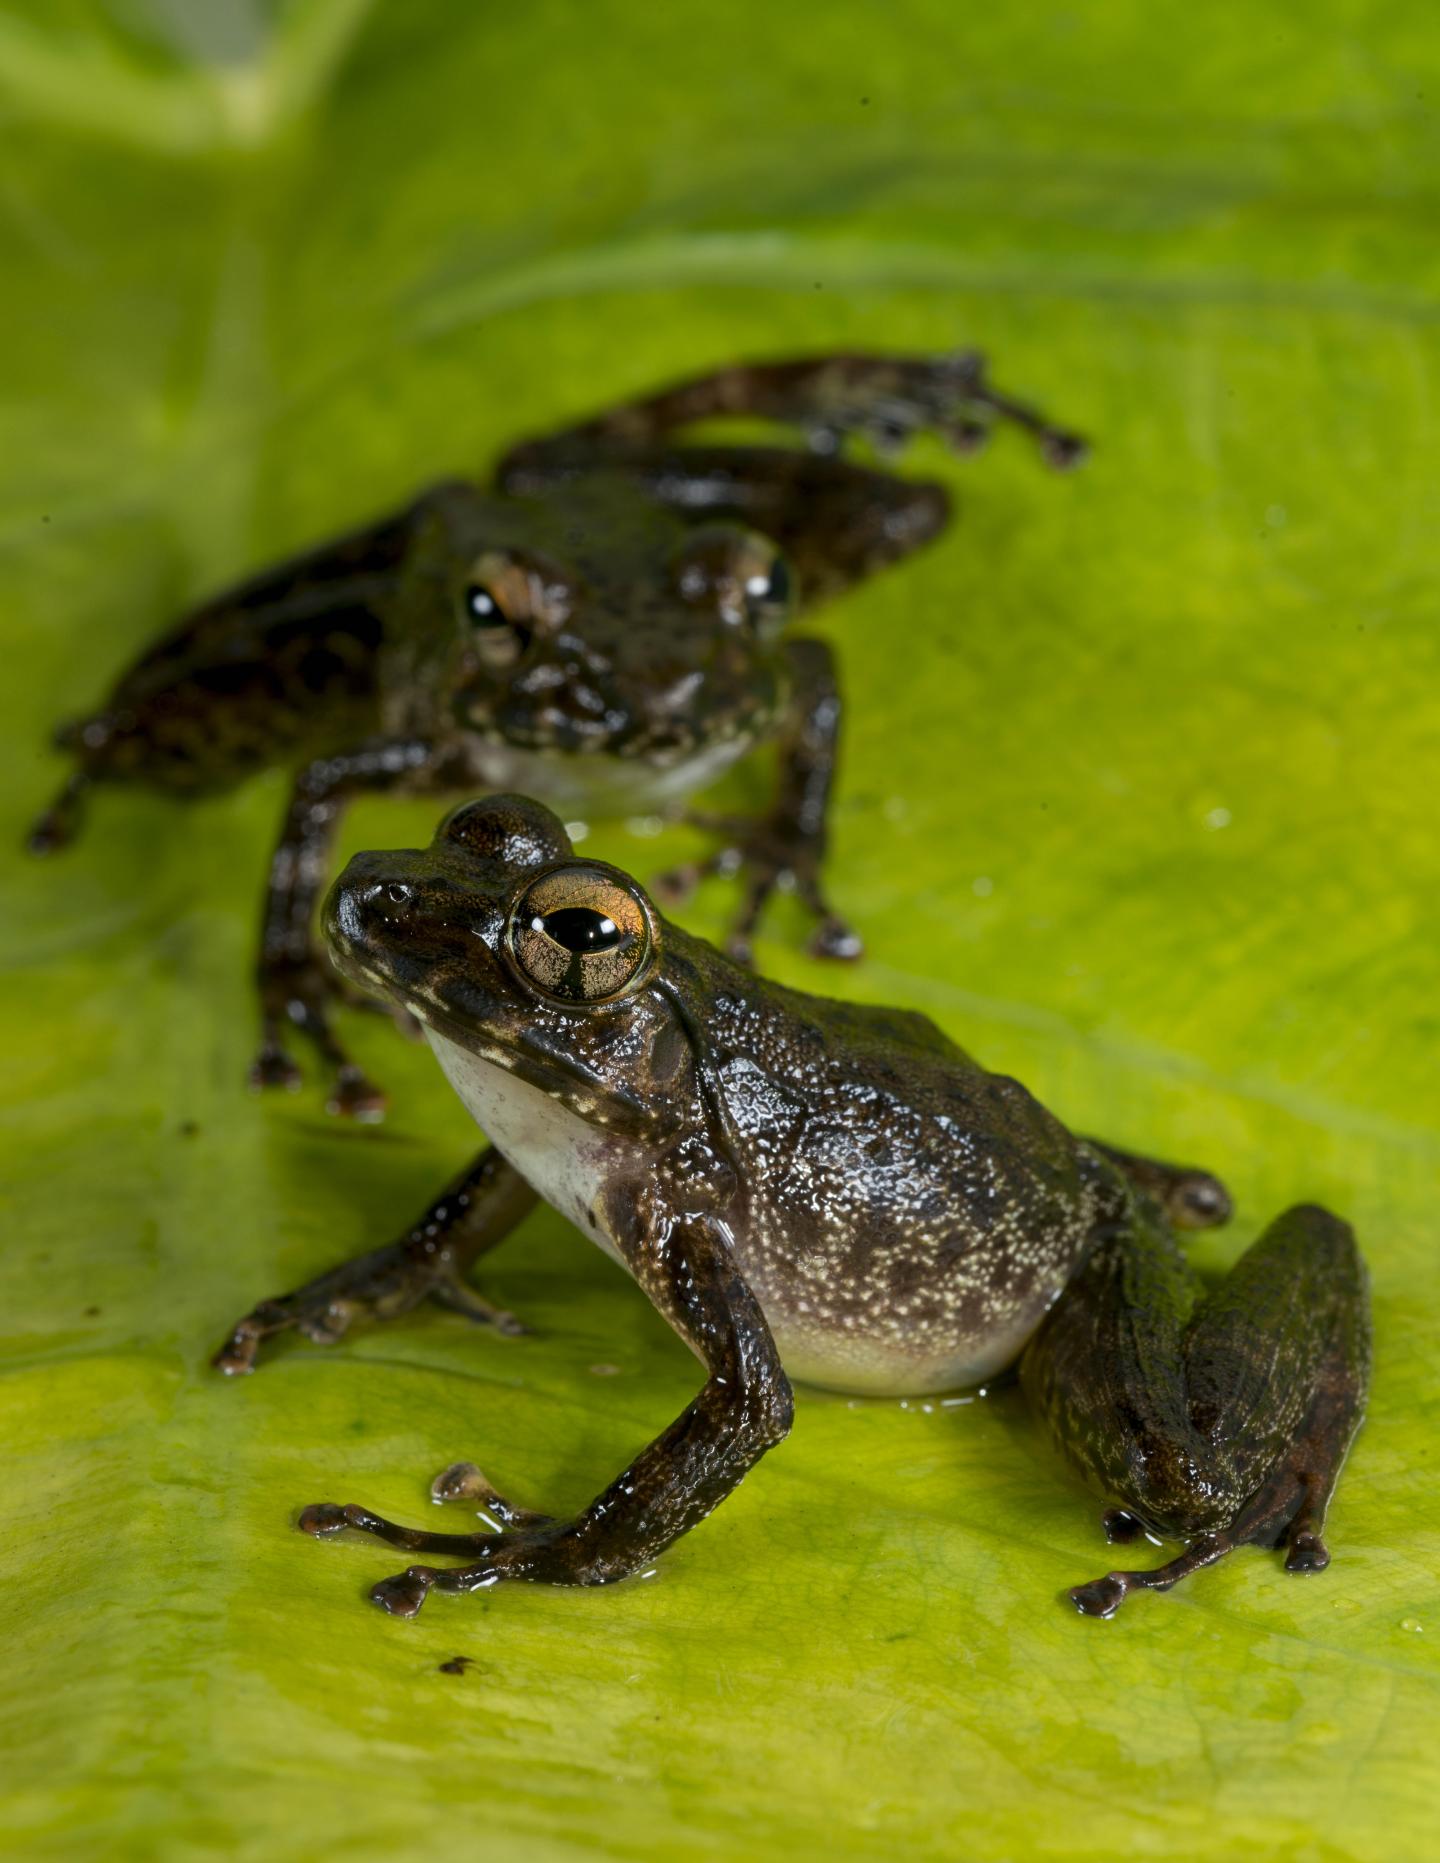 Most Modern Frogs Originated Later Than Previously Thought